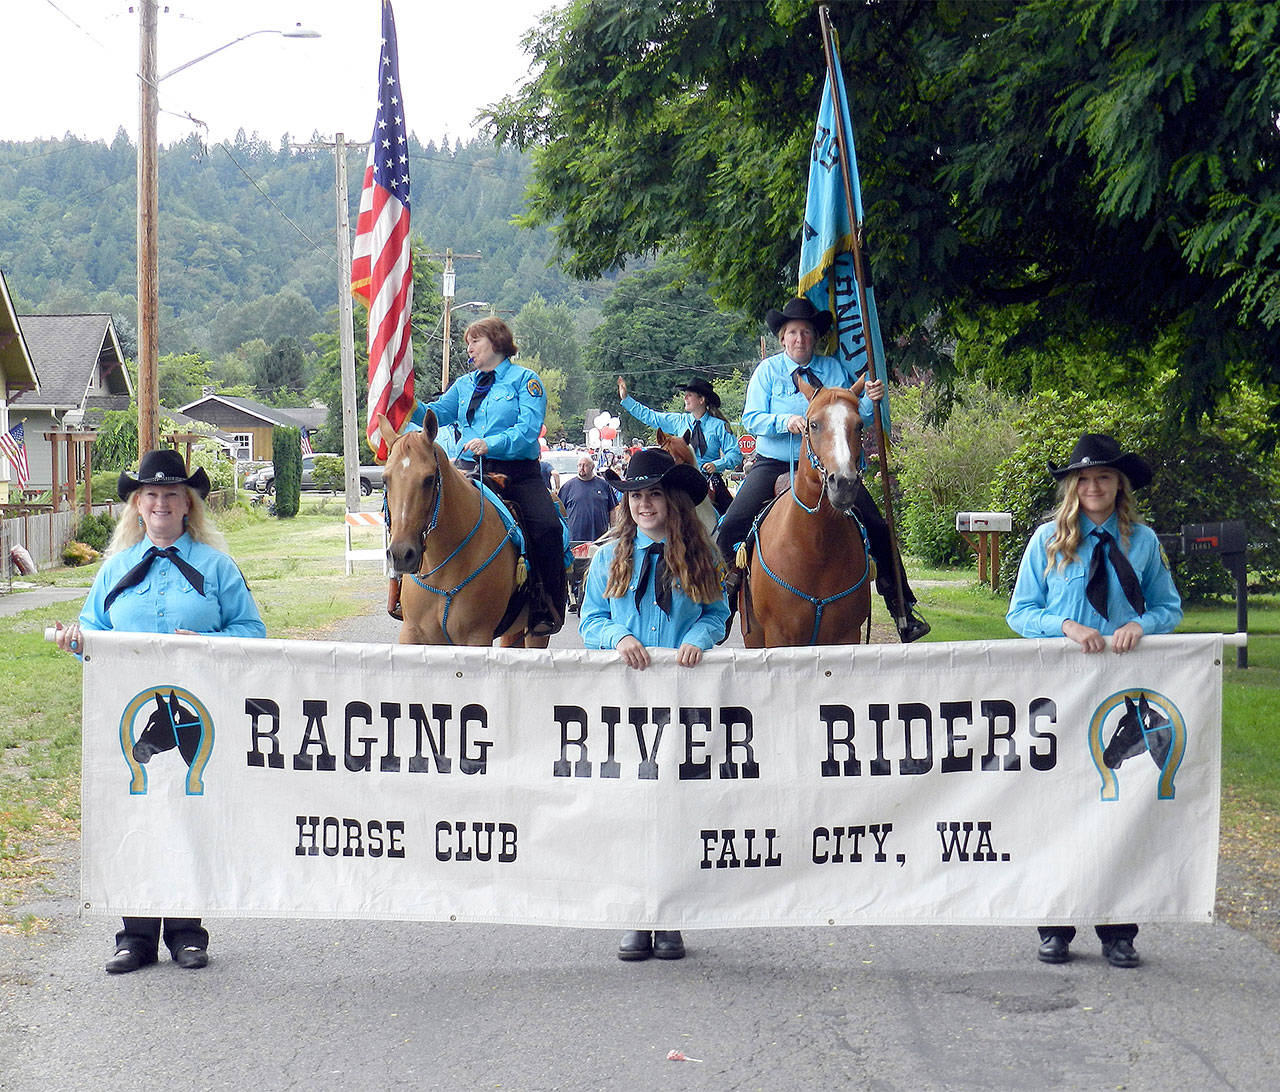 The Raging River Riders Horse Club, here lining up for a Fourth of July parade, will have a booth at the Community Info Day Saturday at Fall City Library.                                Williams Shaw/File Photo